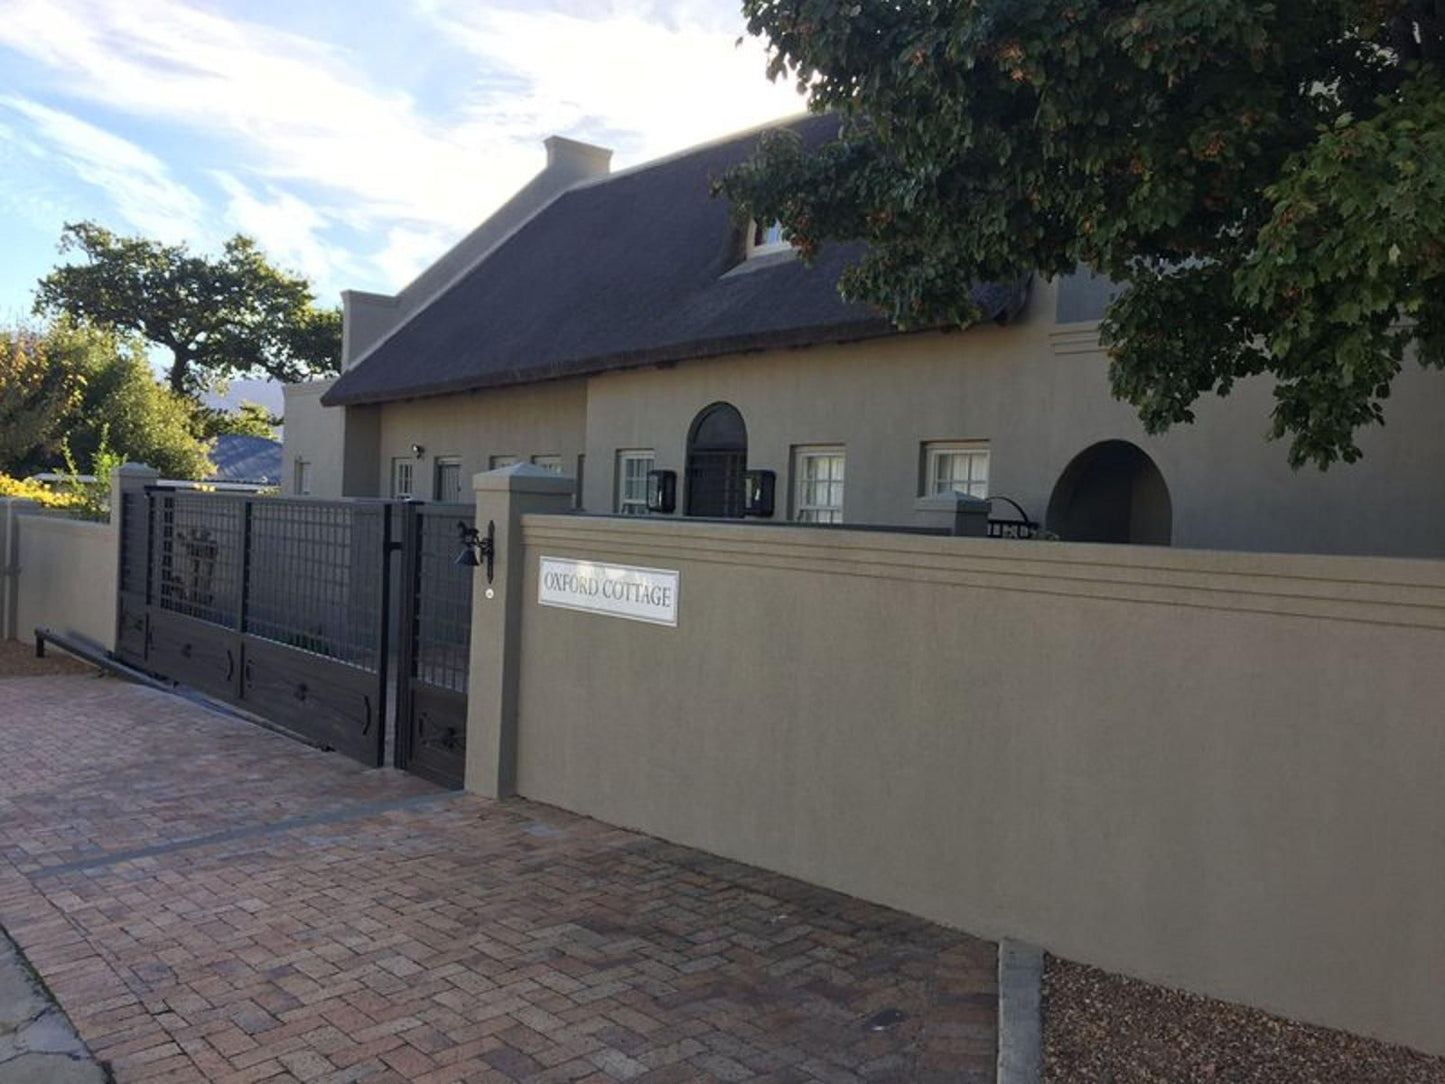 Oxford Cottage Franschhoek Western Cape South Africa House, Building, Architecture